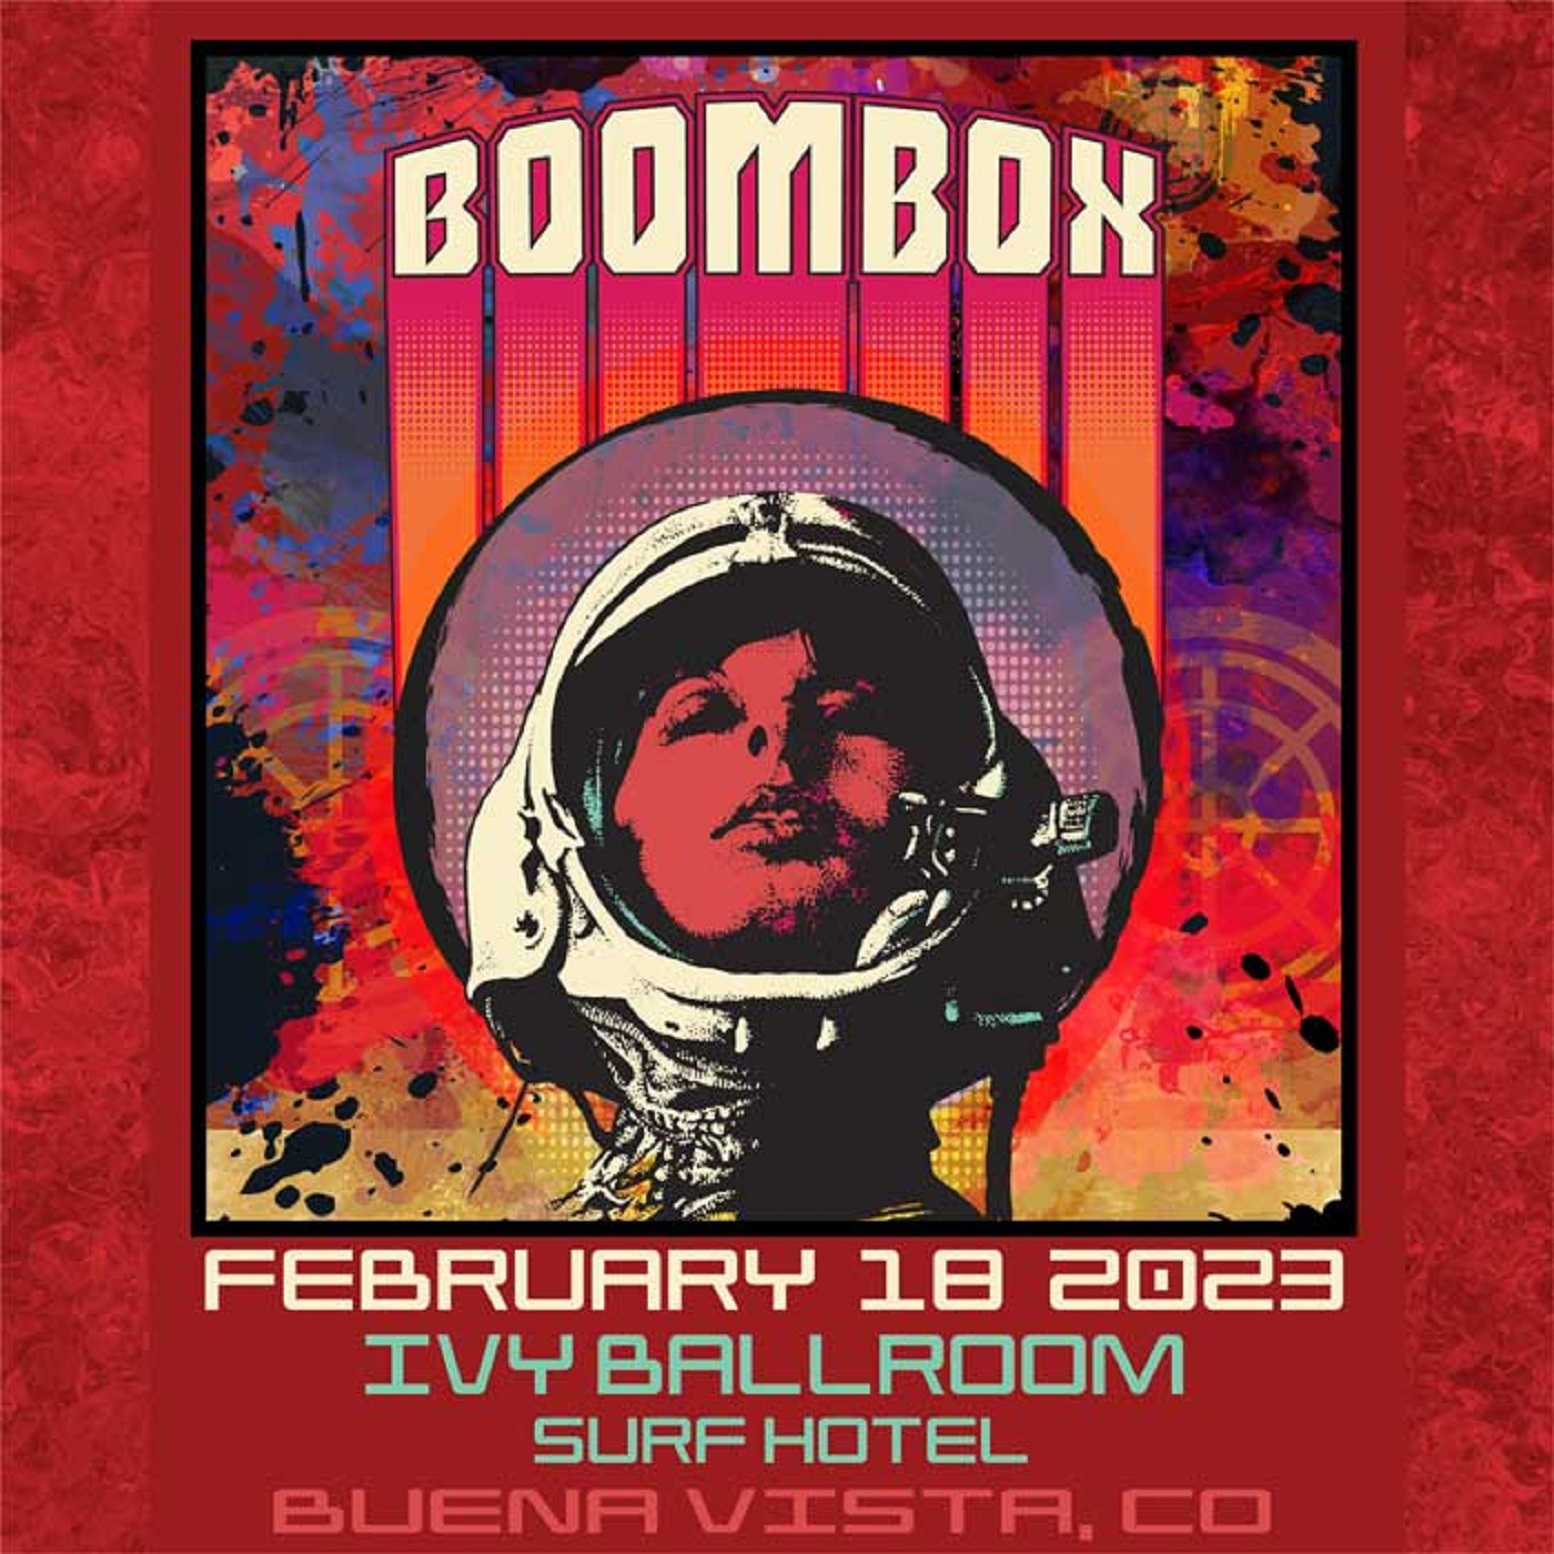 An Evening with BoomBox at Ivy Ballroom this Saturday night